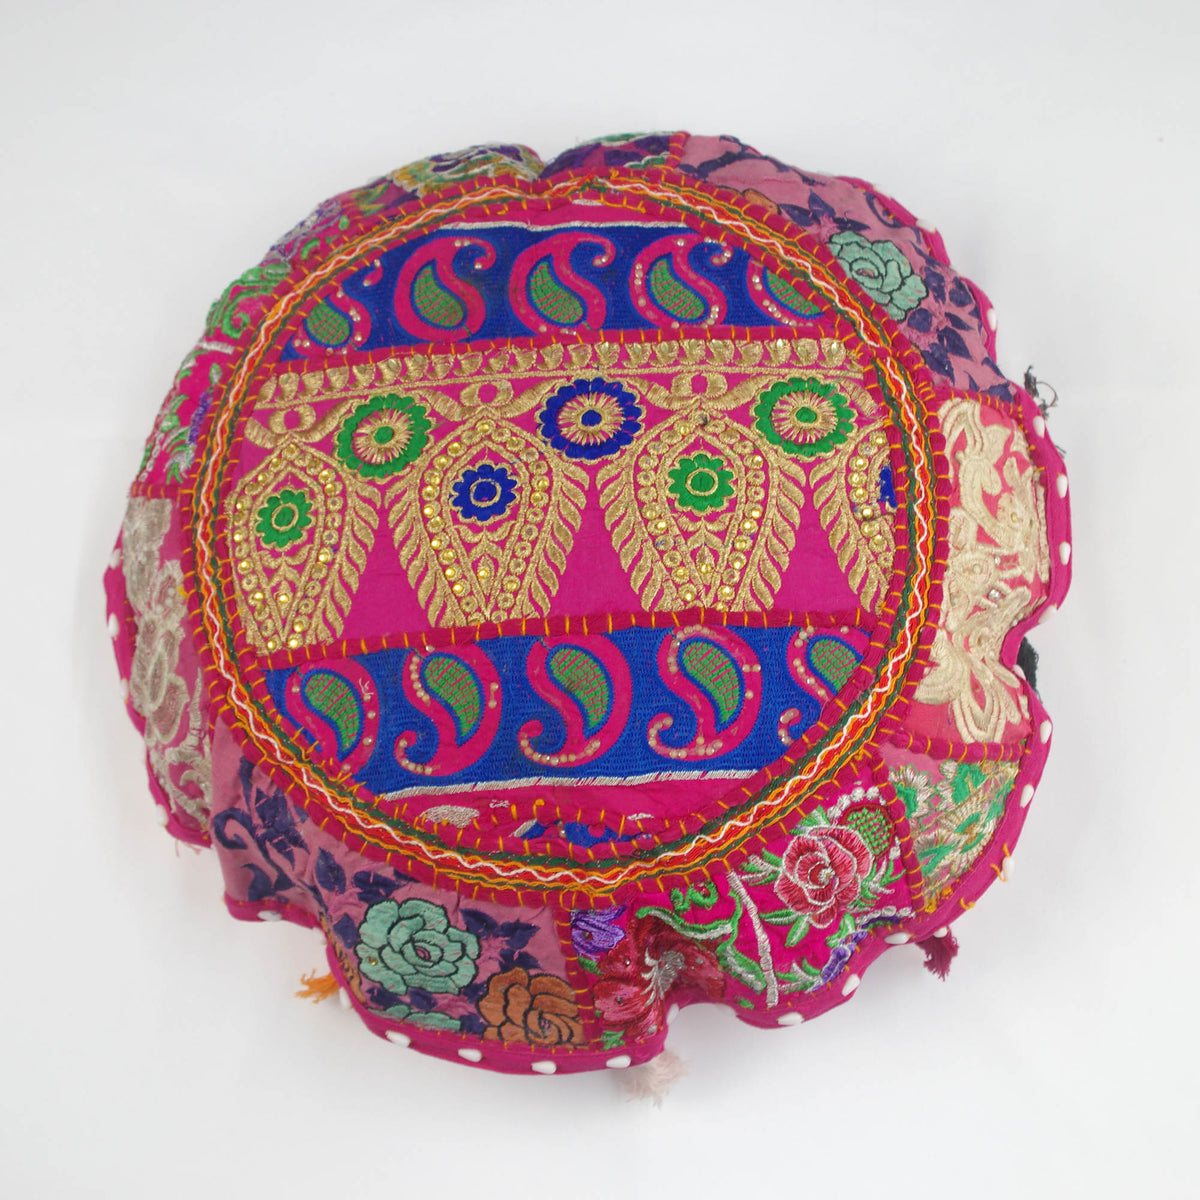 Pink Paisley Round Floor Embroidered Patchwork Pouf Ottoman Indian Vintage Cushion Cover 18"